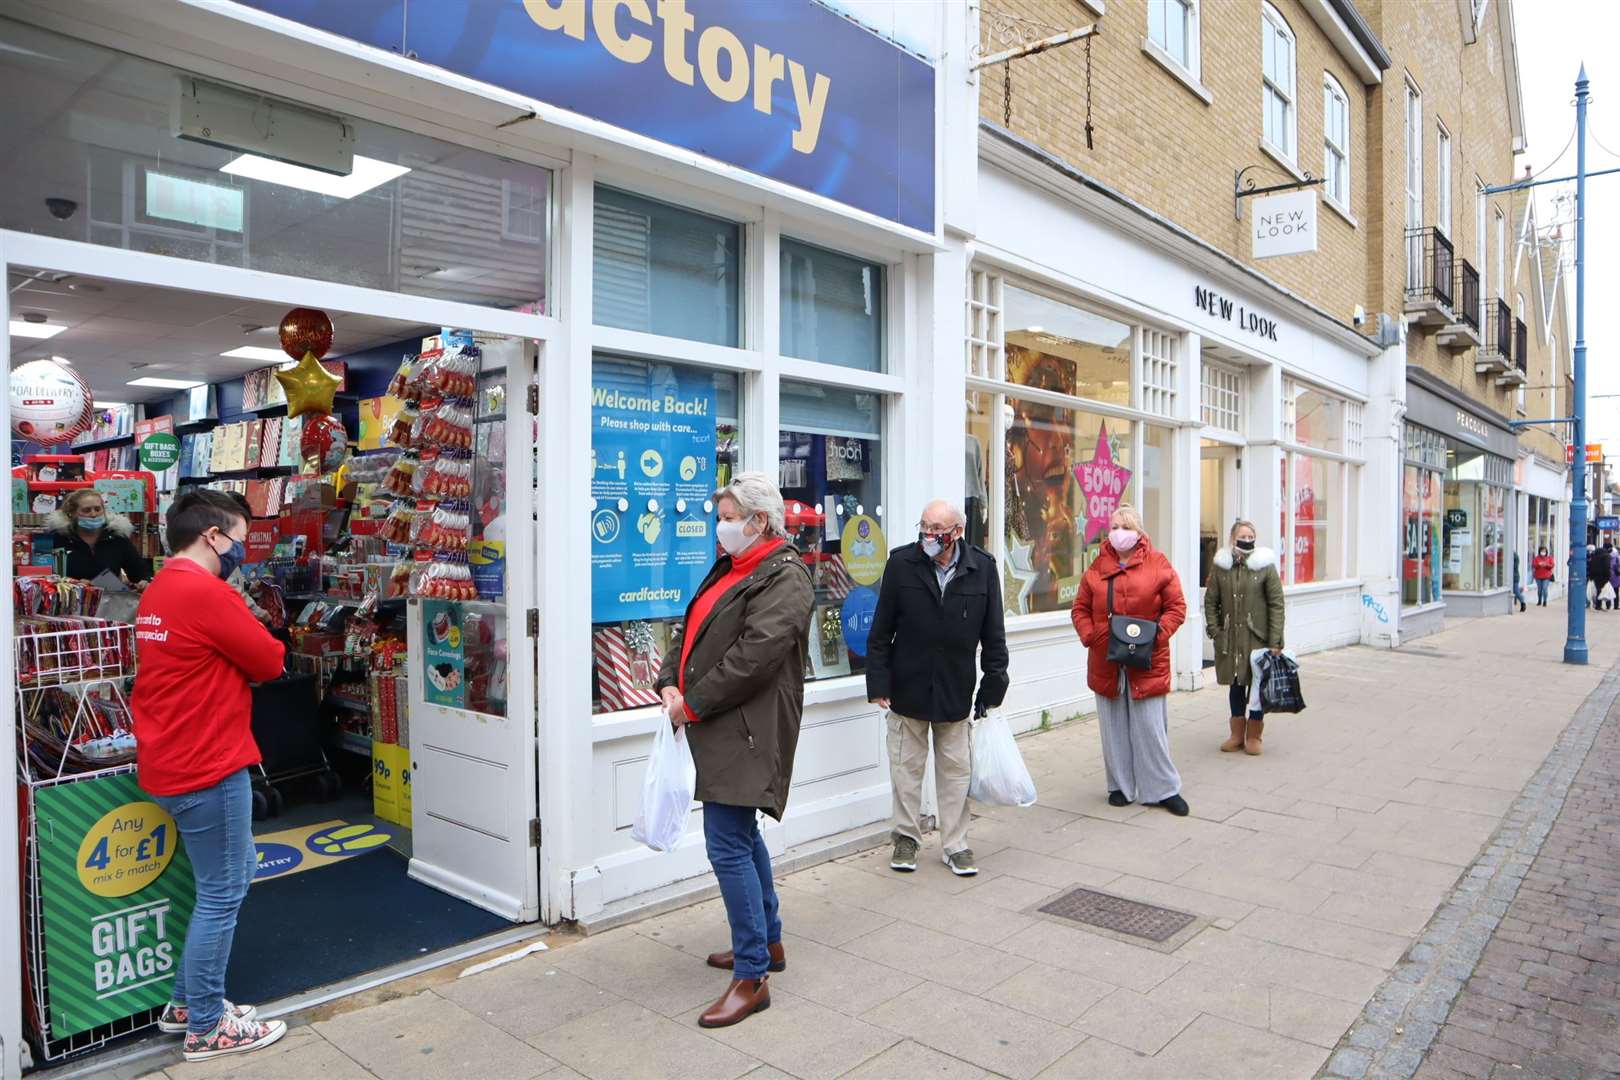 Queuing up outside the Card Factory in Sheerness High Street